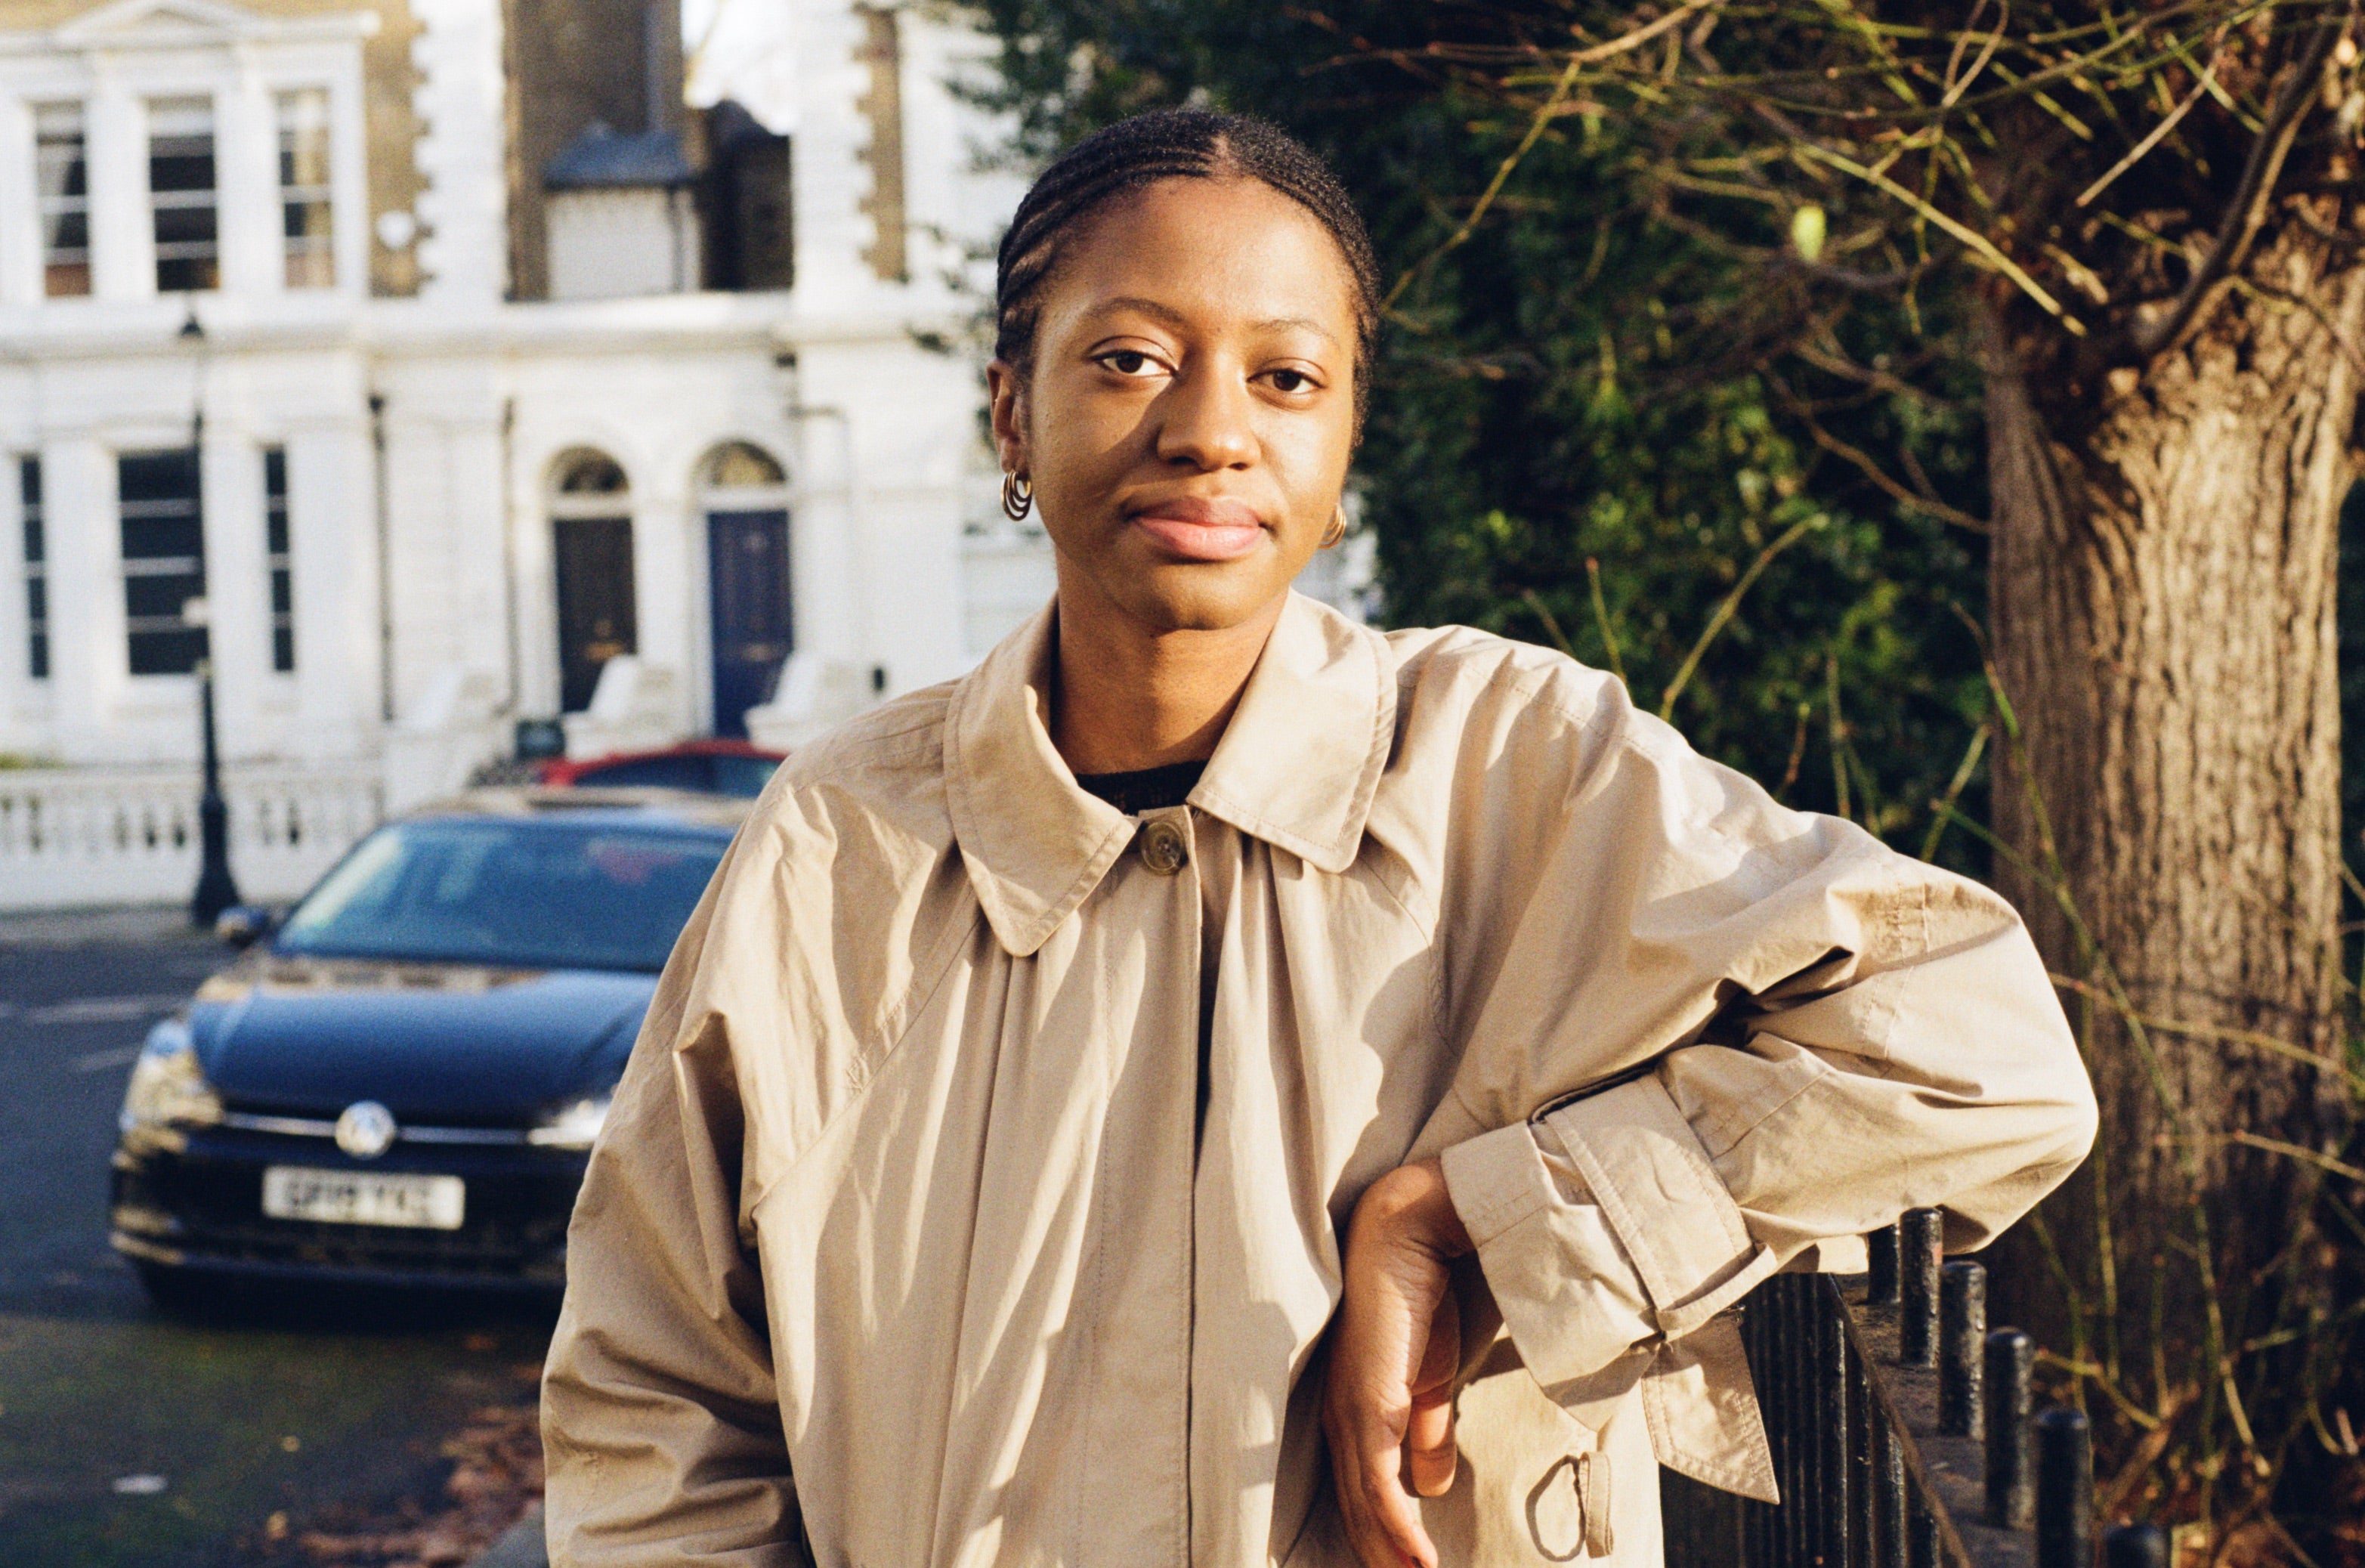 Ayo Akingbade’s latest film ‘Fire in My Belly’ hopes to reveal the dreams, anxieties, and activism of young Londoners.